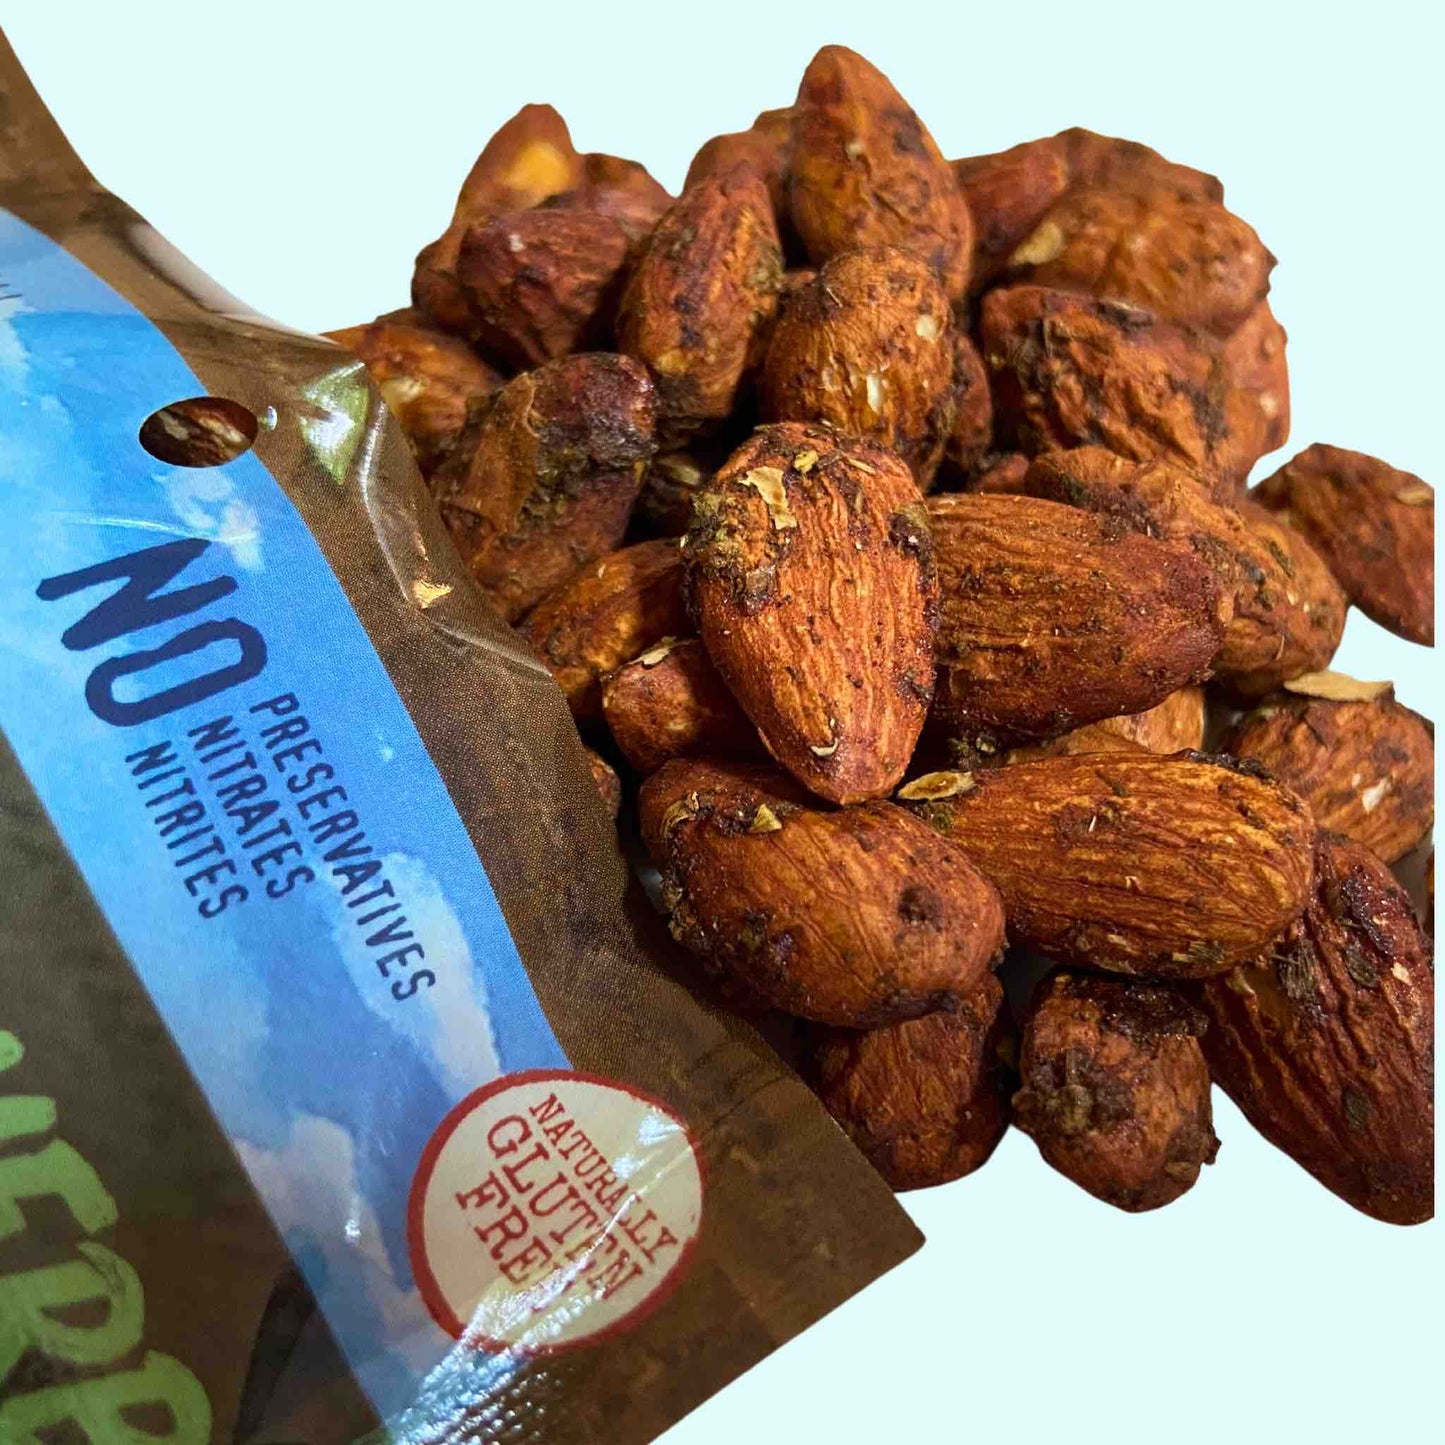 Foreign Flavors Smoked Nuts Sampler